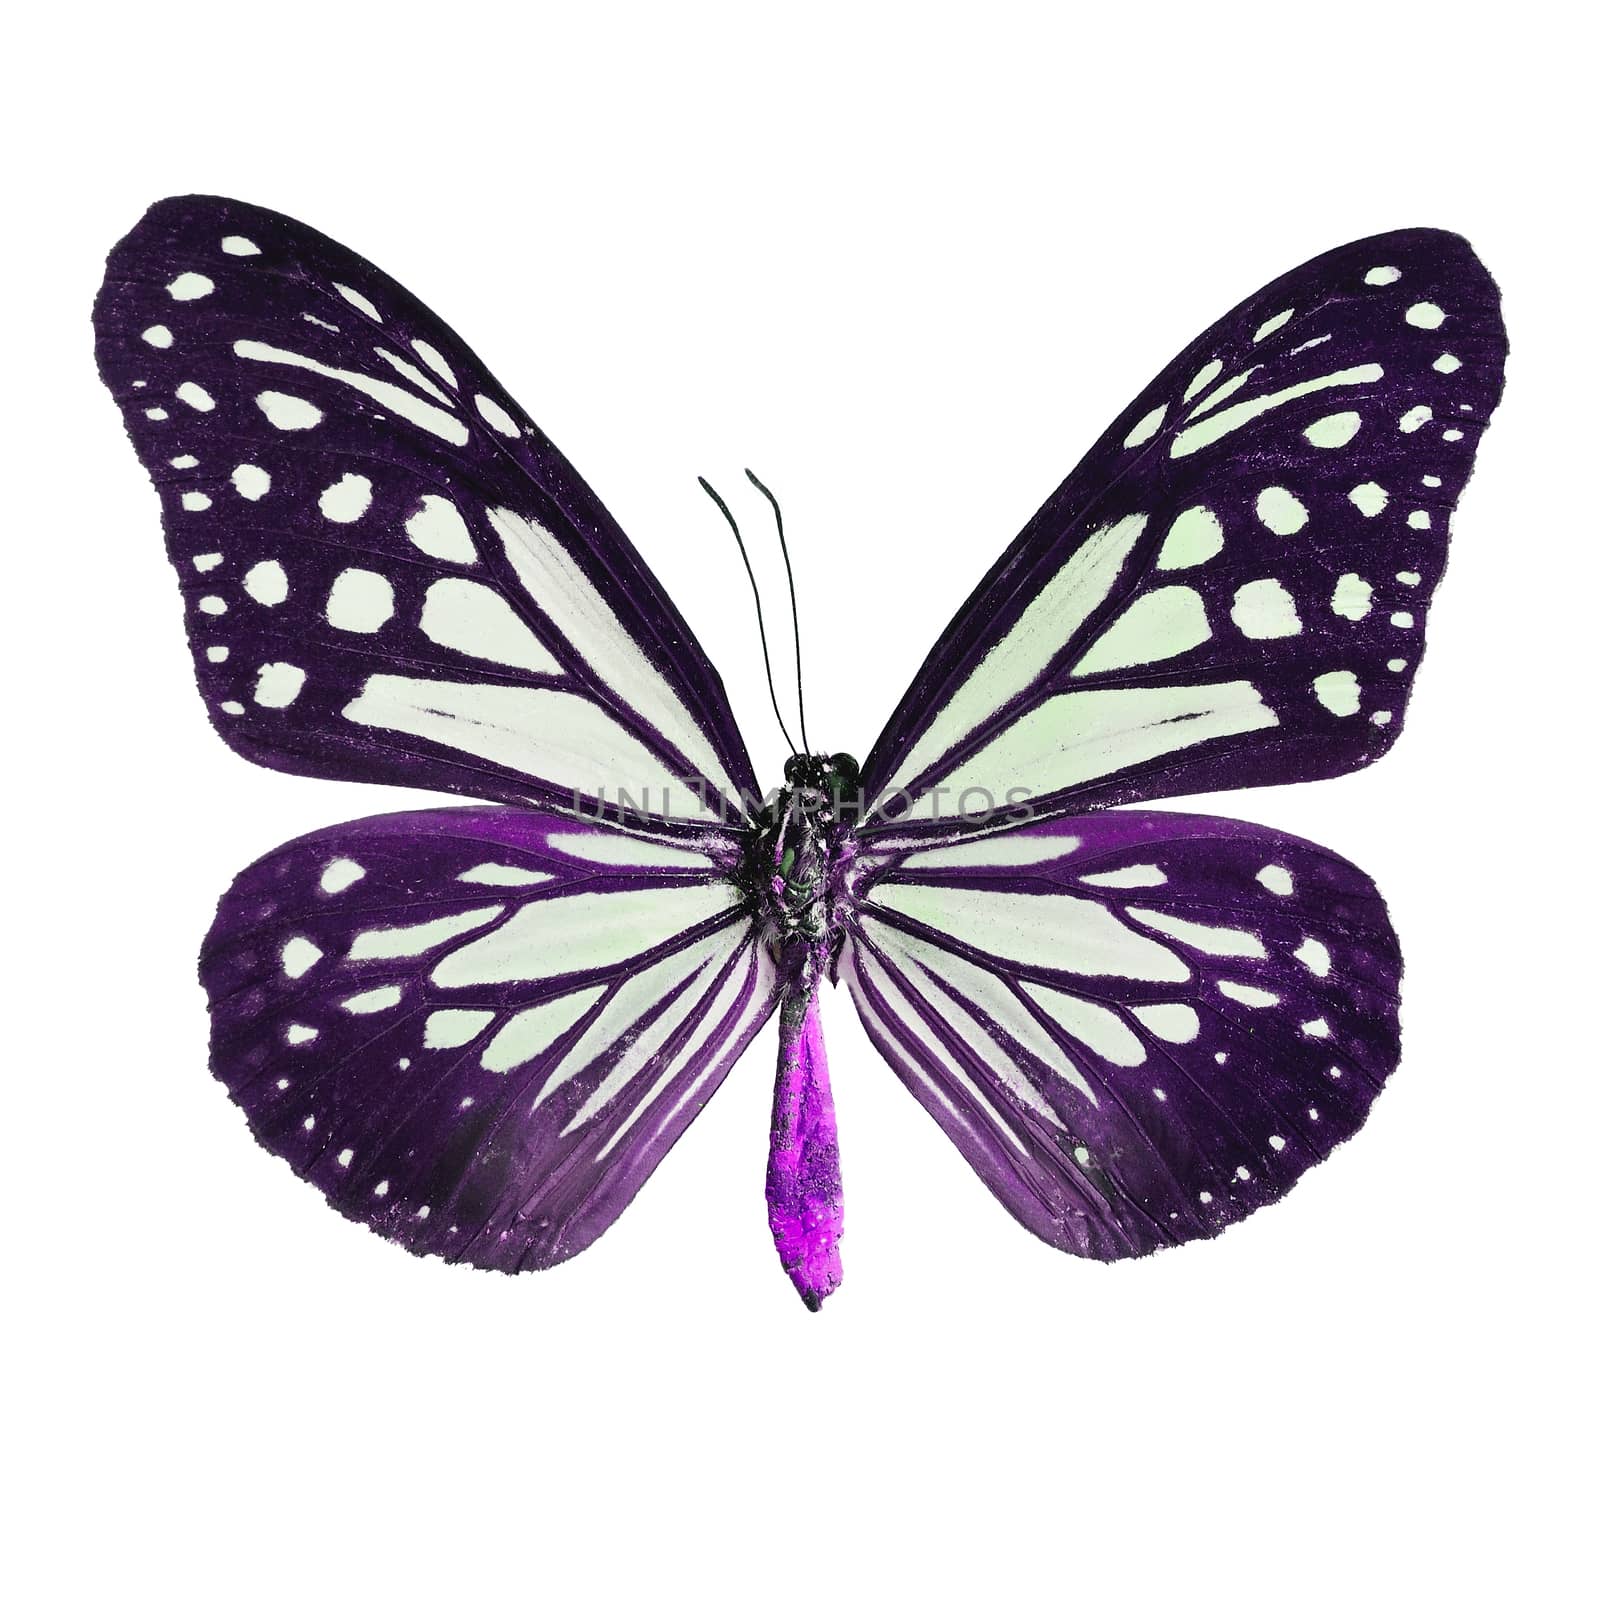 Purple butterfly,Tawny Mime butterfly in fancy color profile, isolate on white background